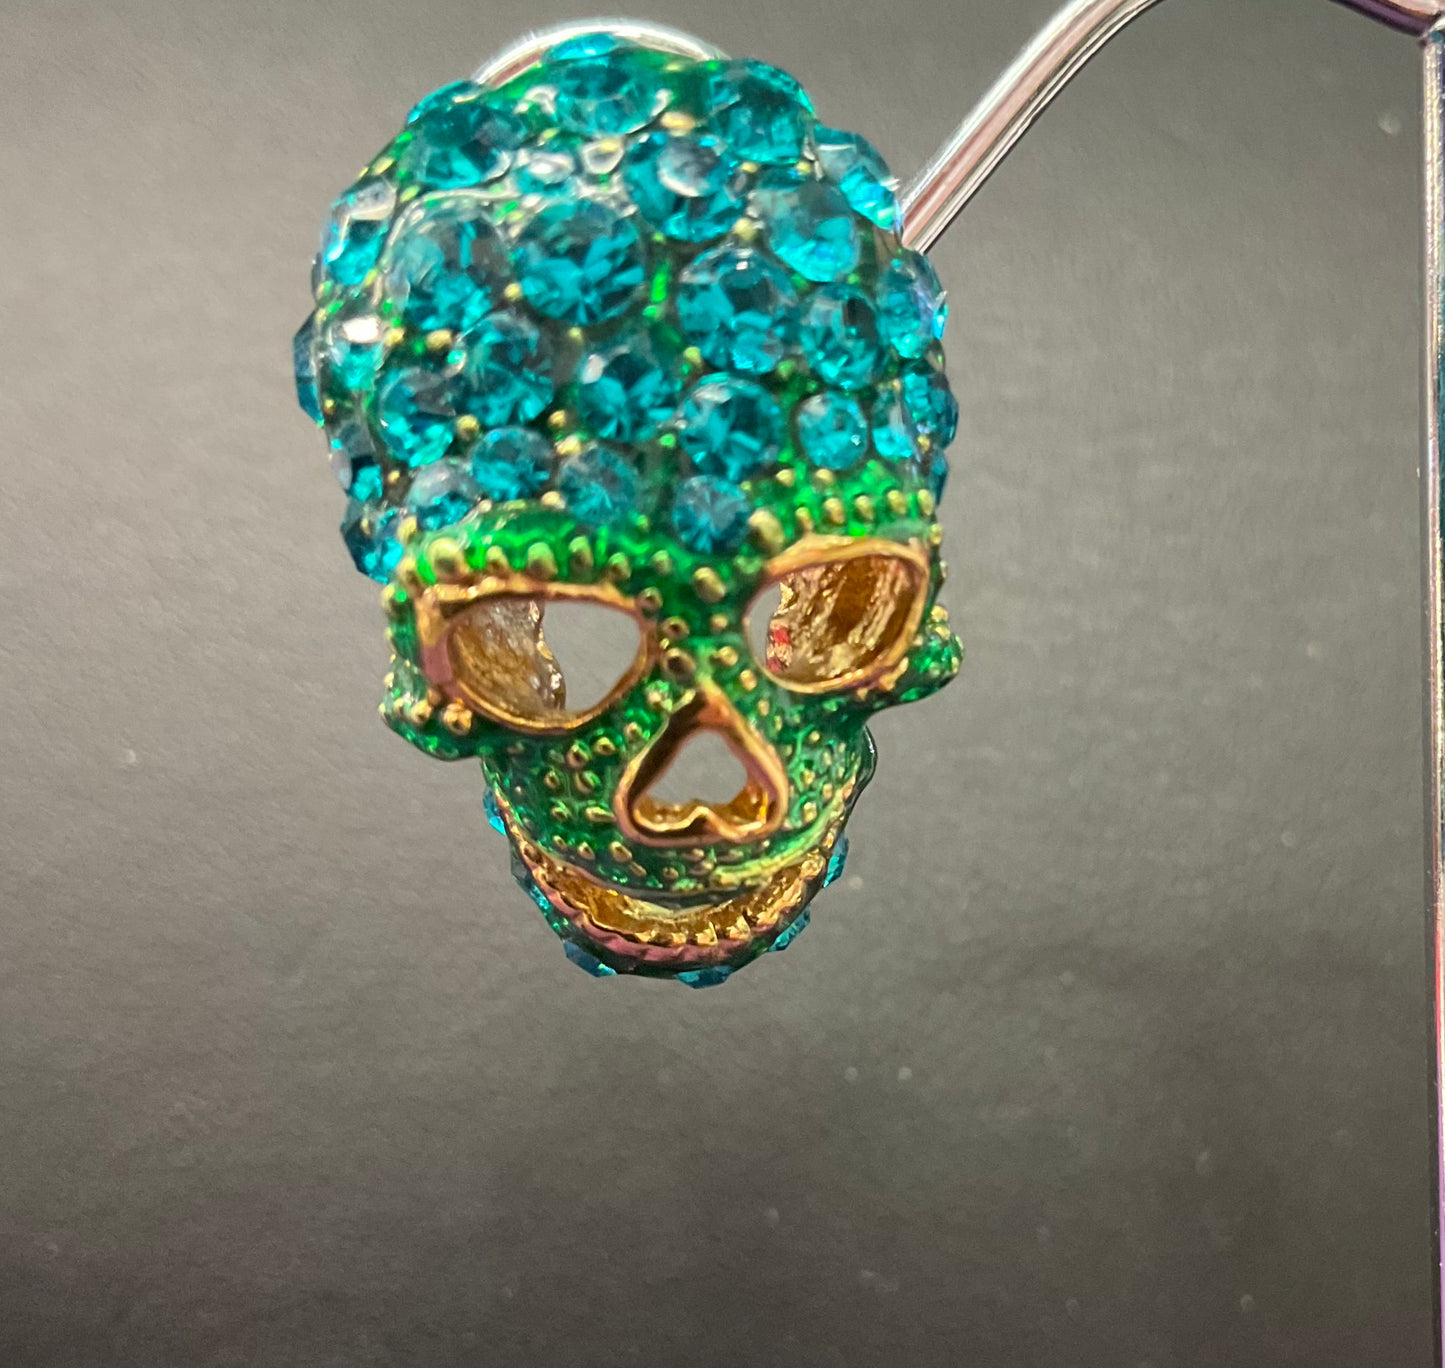 Vintage Butler and Wilson Turquoise and green rhinestone crystal skull stud earrings. Day of the dead, gifts for them, signed, as new.